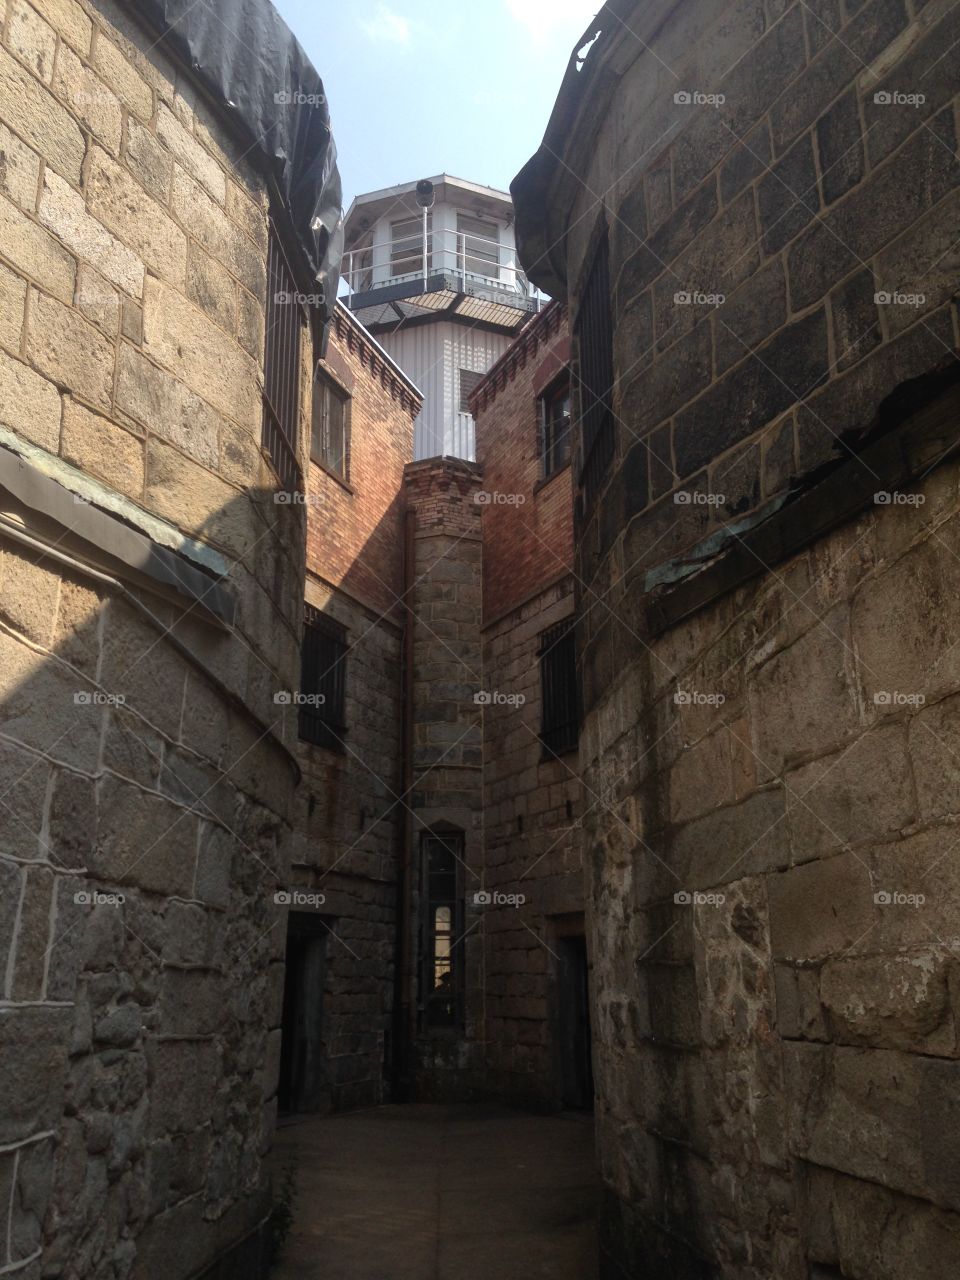 Eastern State Penitentiary . The central tower of the world's first modern prison flanked by two cell blocks